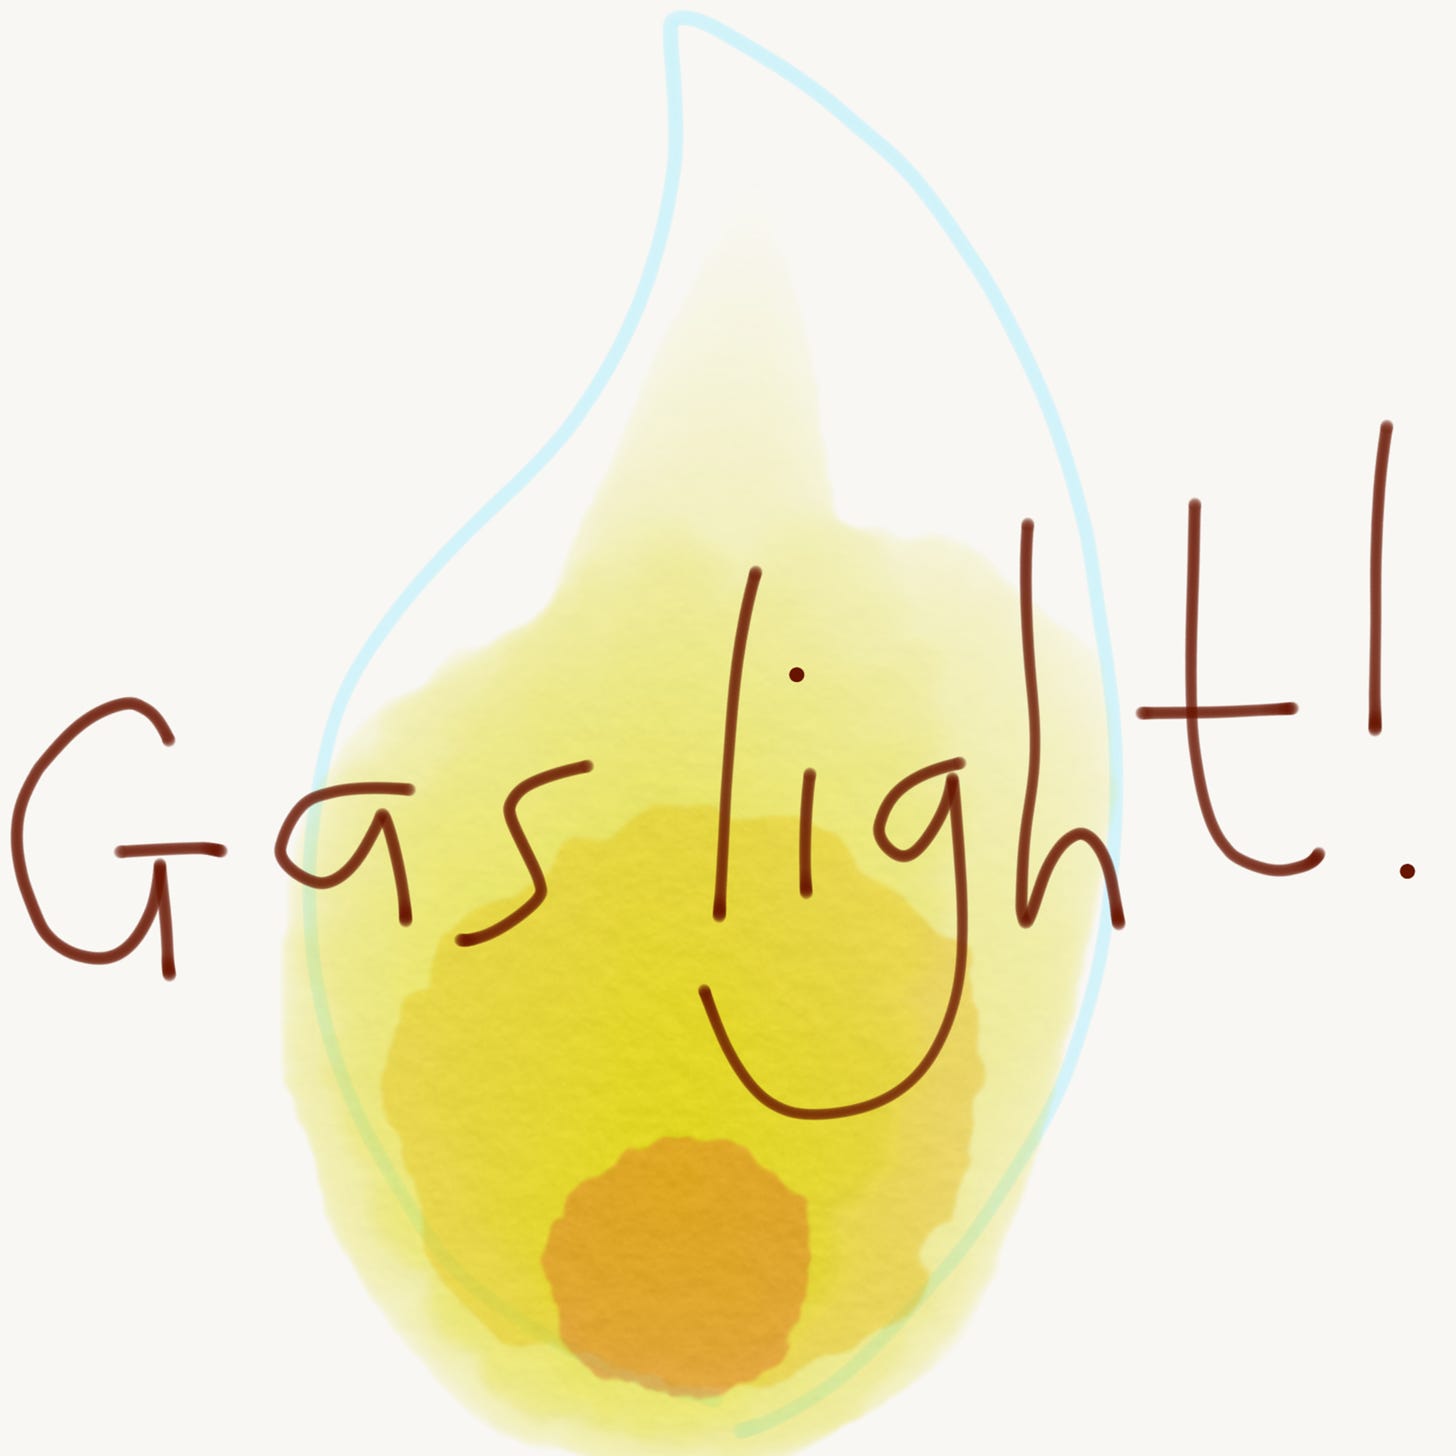 Sketch of gas flame with gas light! written over the top.